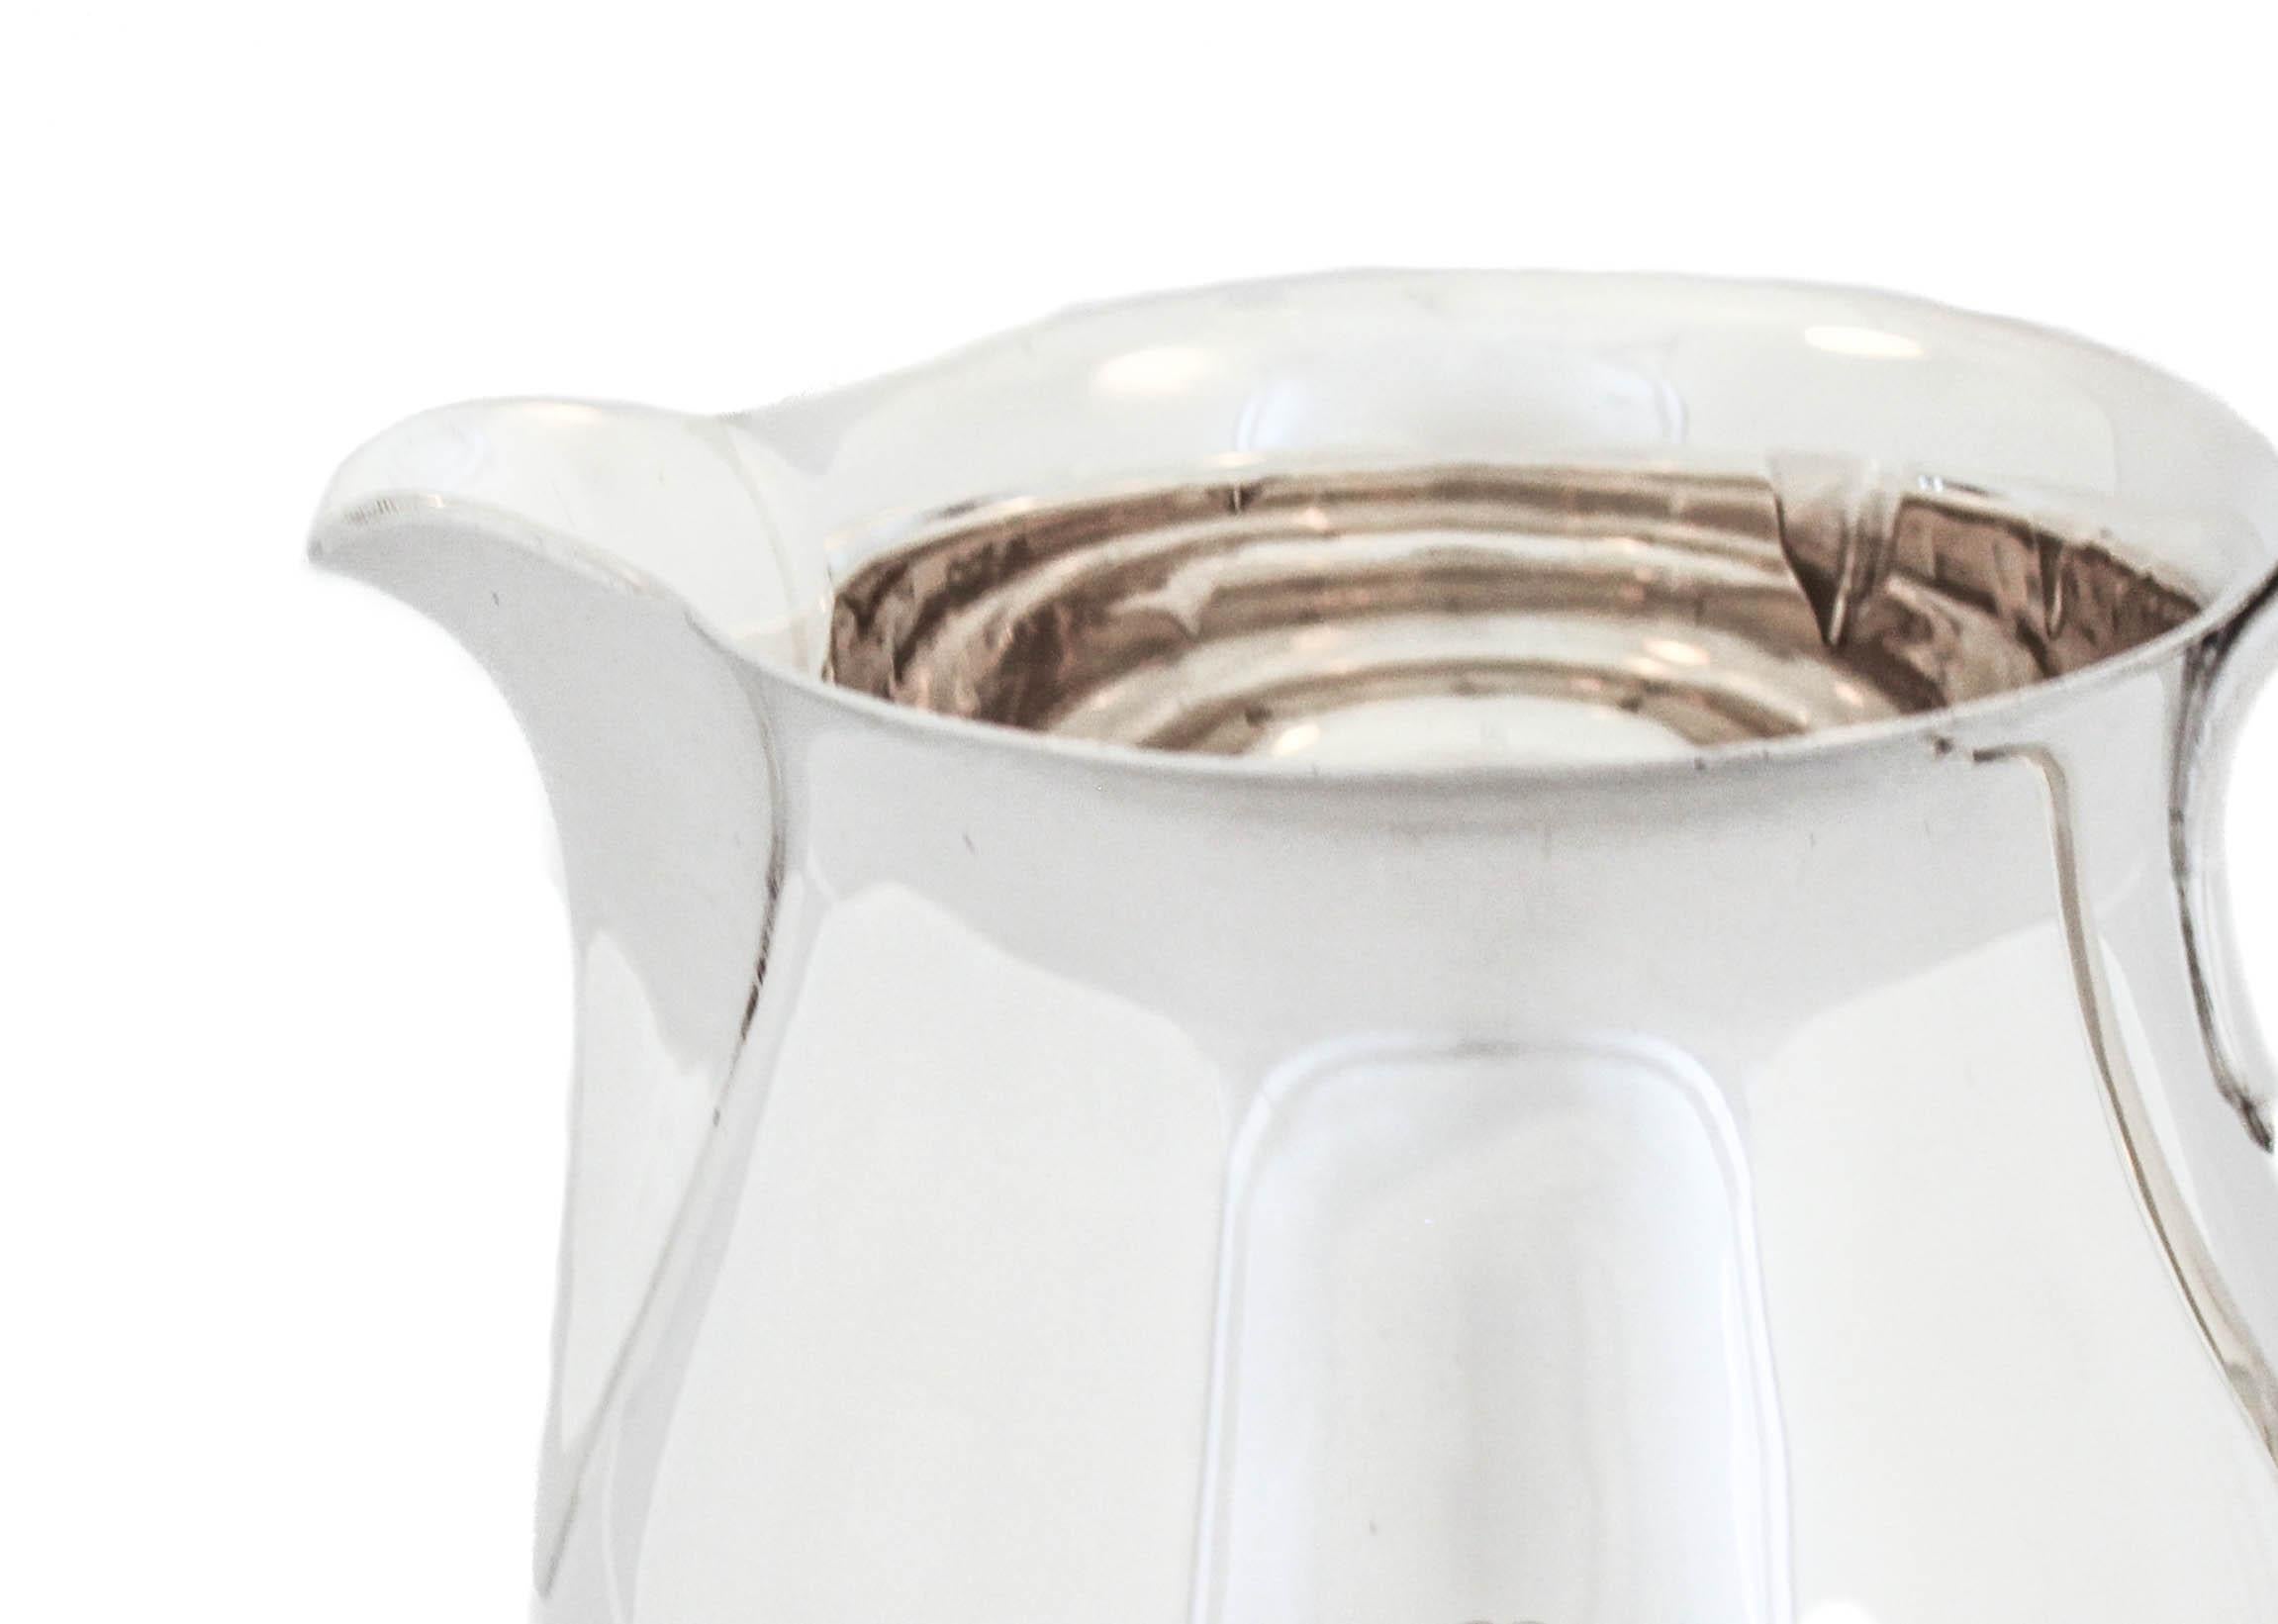 Being offered is a sterling silver water pitcher by the world renowned Tiffany and Company, hallmarked 1921.  It has a federalist shape and design and no decorative features, in keeping with the early American federalist style.  It holds 3 3/4 pints